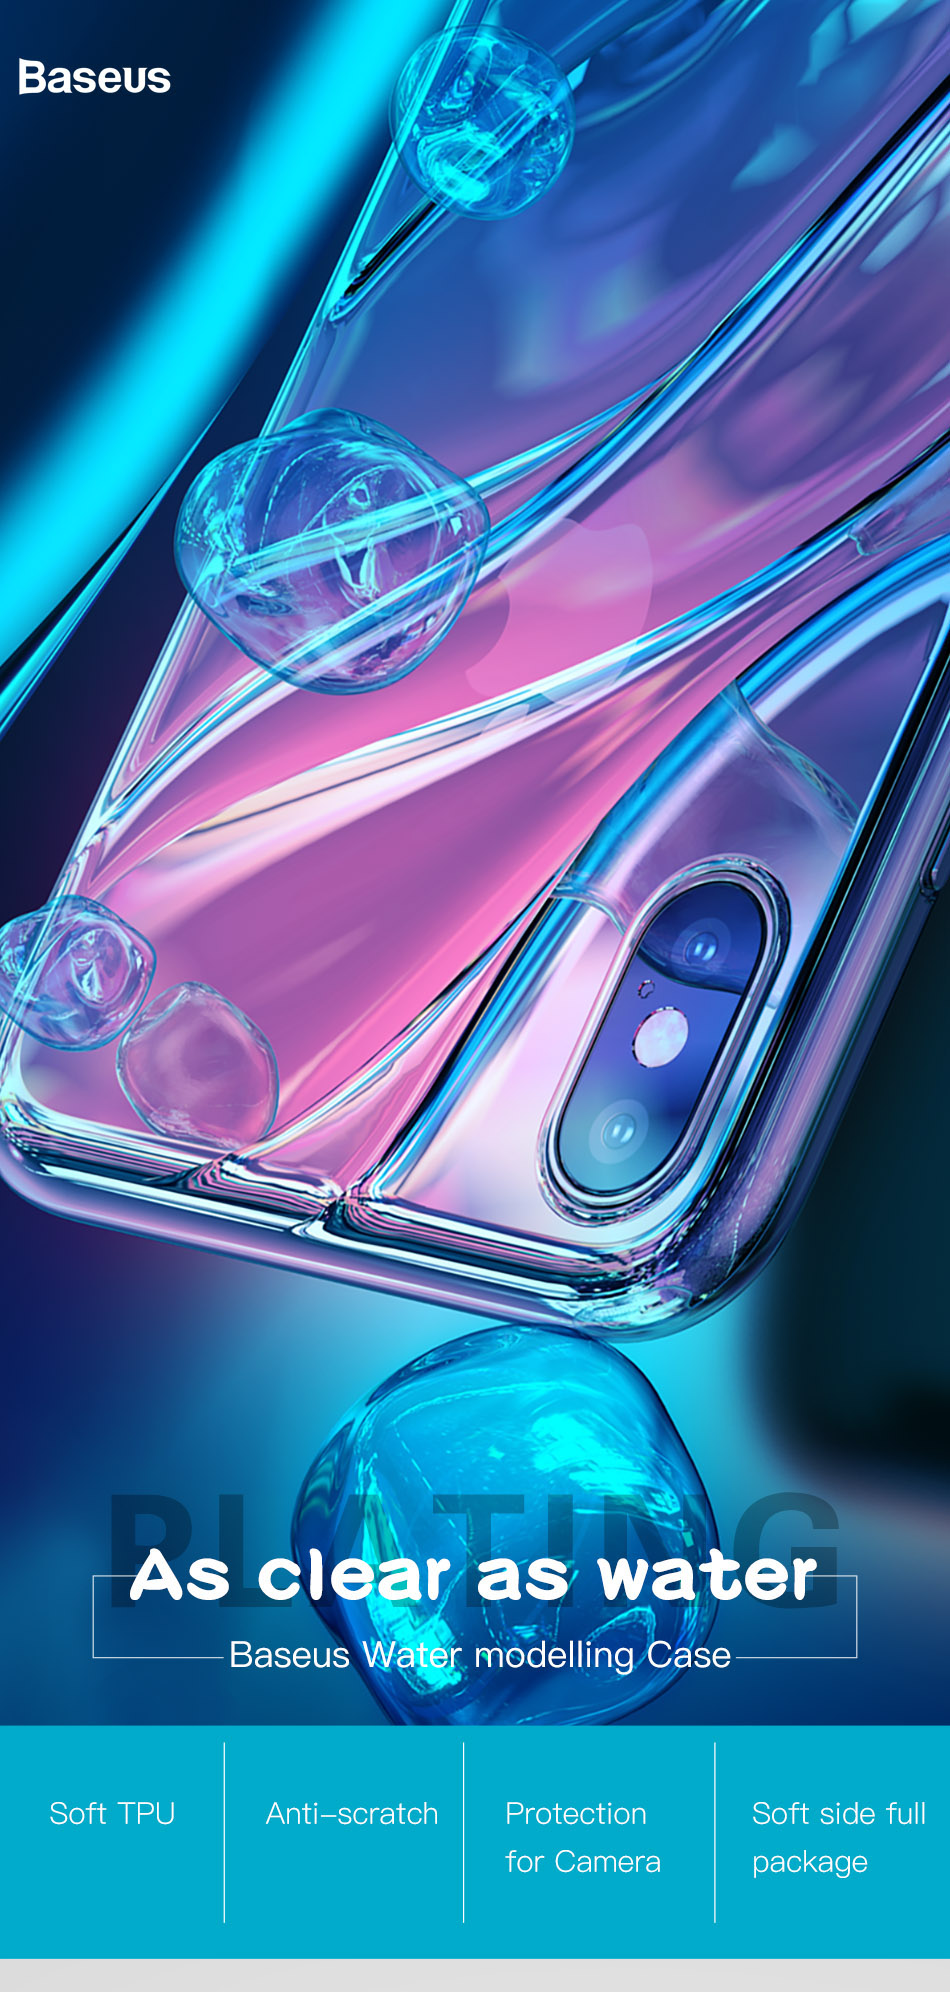 Baseus-Water-Model-Transparent-Soft-TPU-Protective-Case-for-iPhone-X-1293928-1